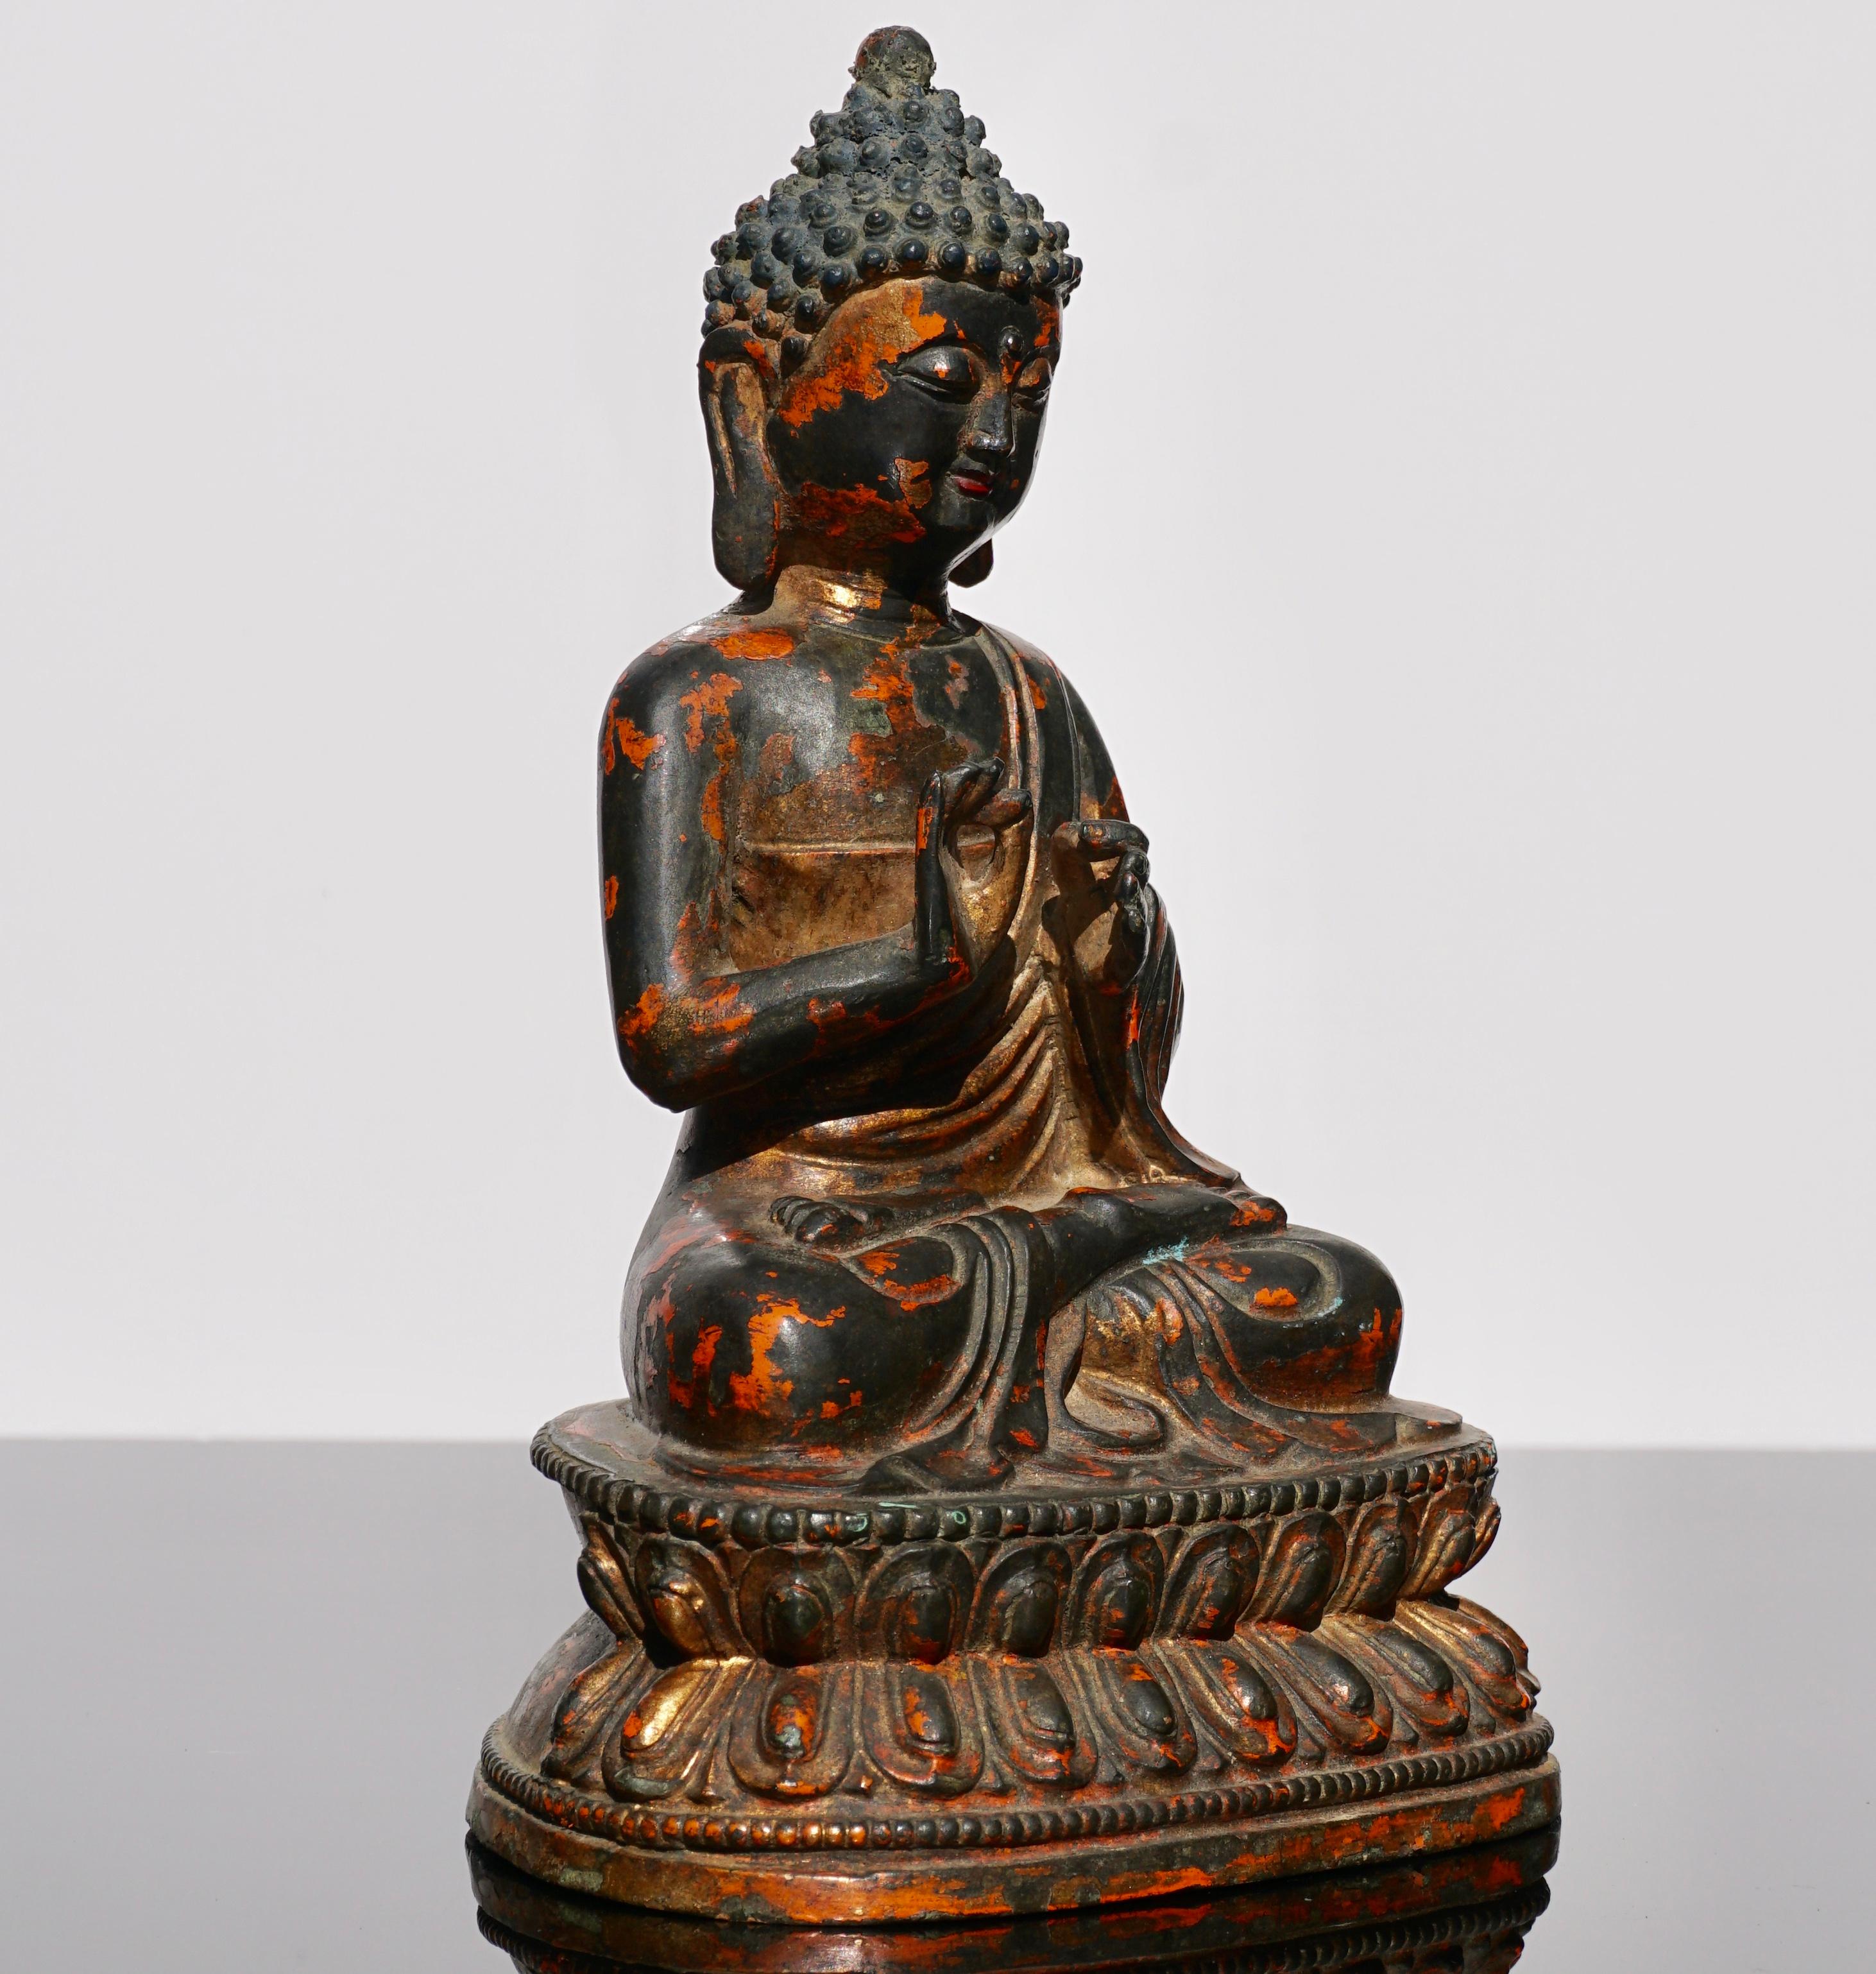 A gilt and lacquered Tibeto- Chinese bronze figure of Buddha, 18th century.

The figure is shown seated in dhyanasana on a double lotus pedestal and holding his right hand in vitarka mudra, the gesture of teaching. The eyes are cast downwards